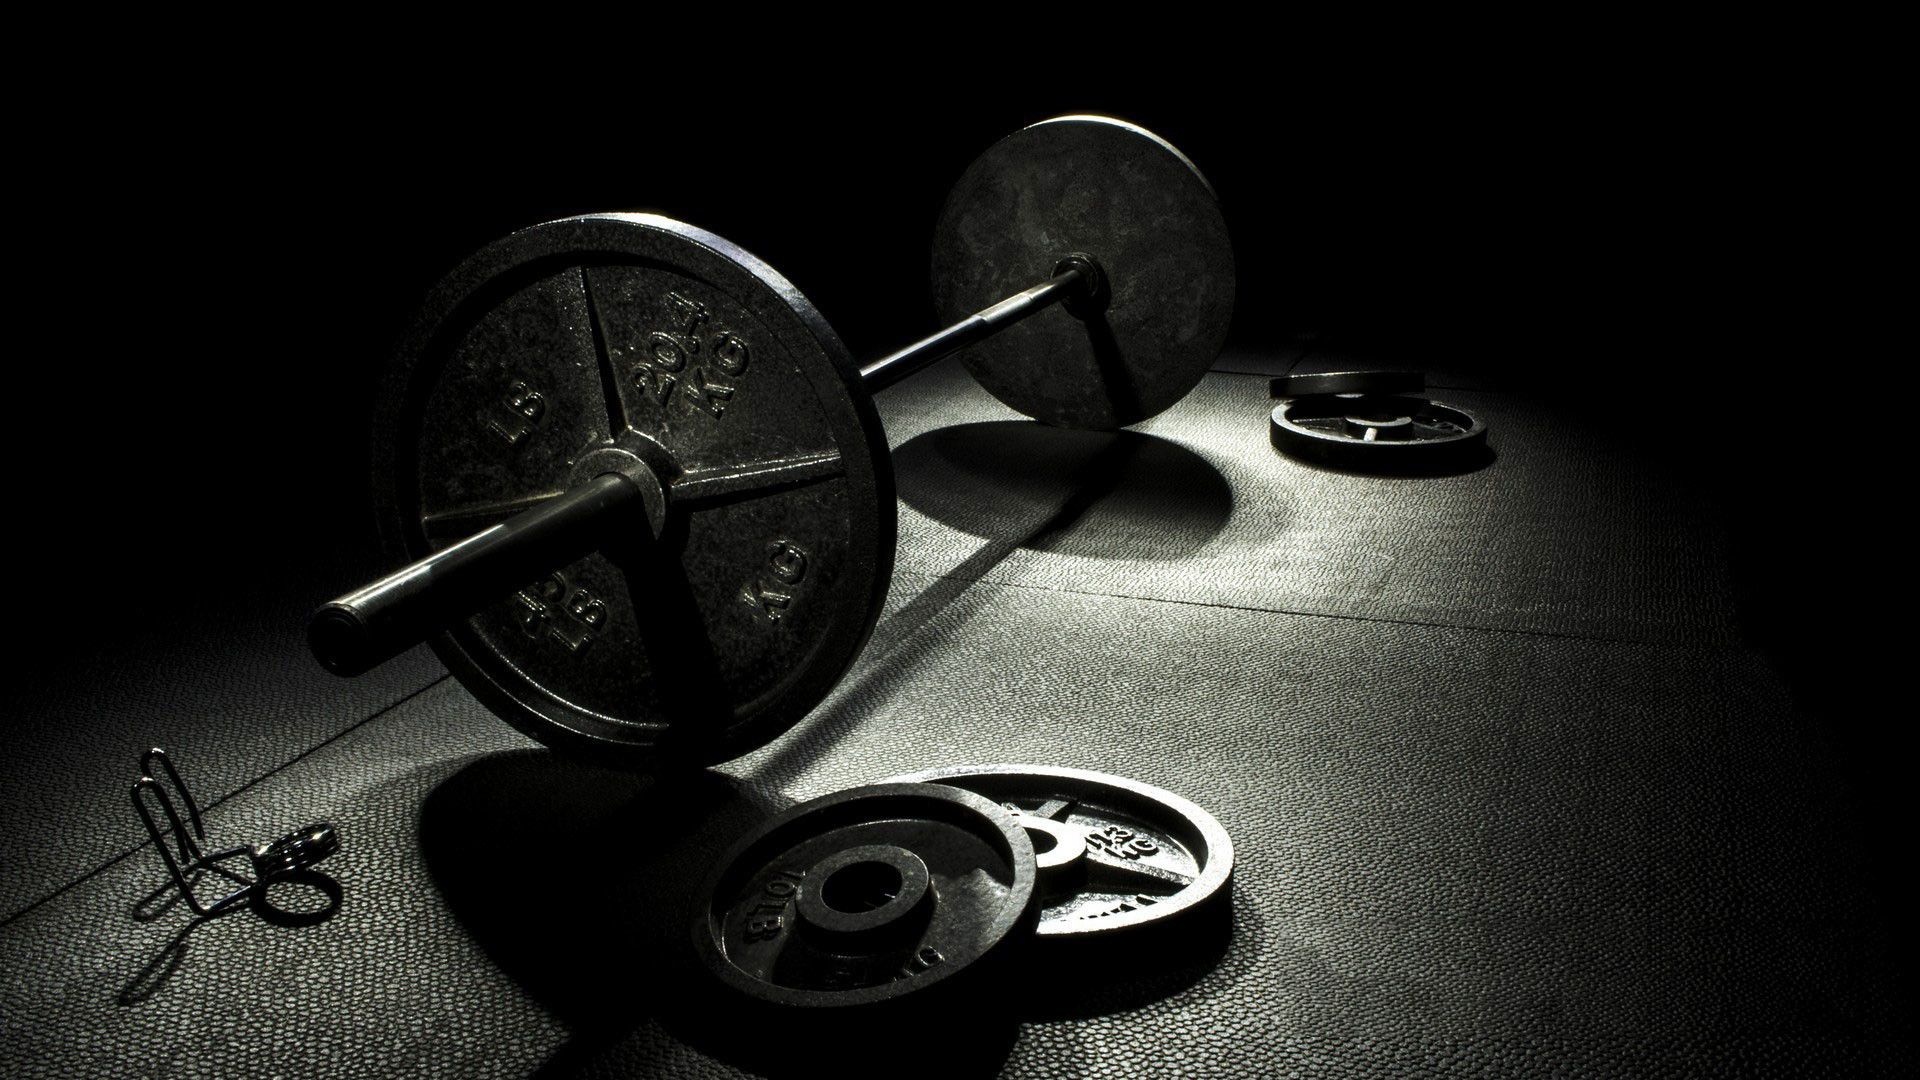 Weightlifting: Black and white, Barbell and weight plates, The heaviest weights lifted. 1920x1080 Full HD Wallpaper.